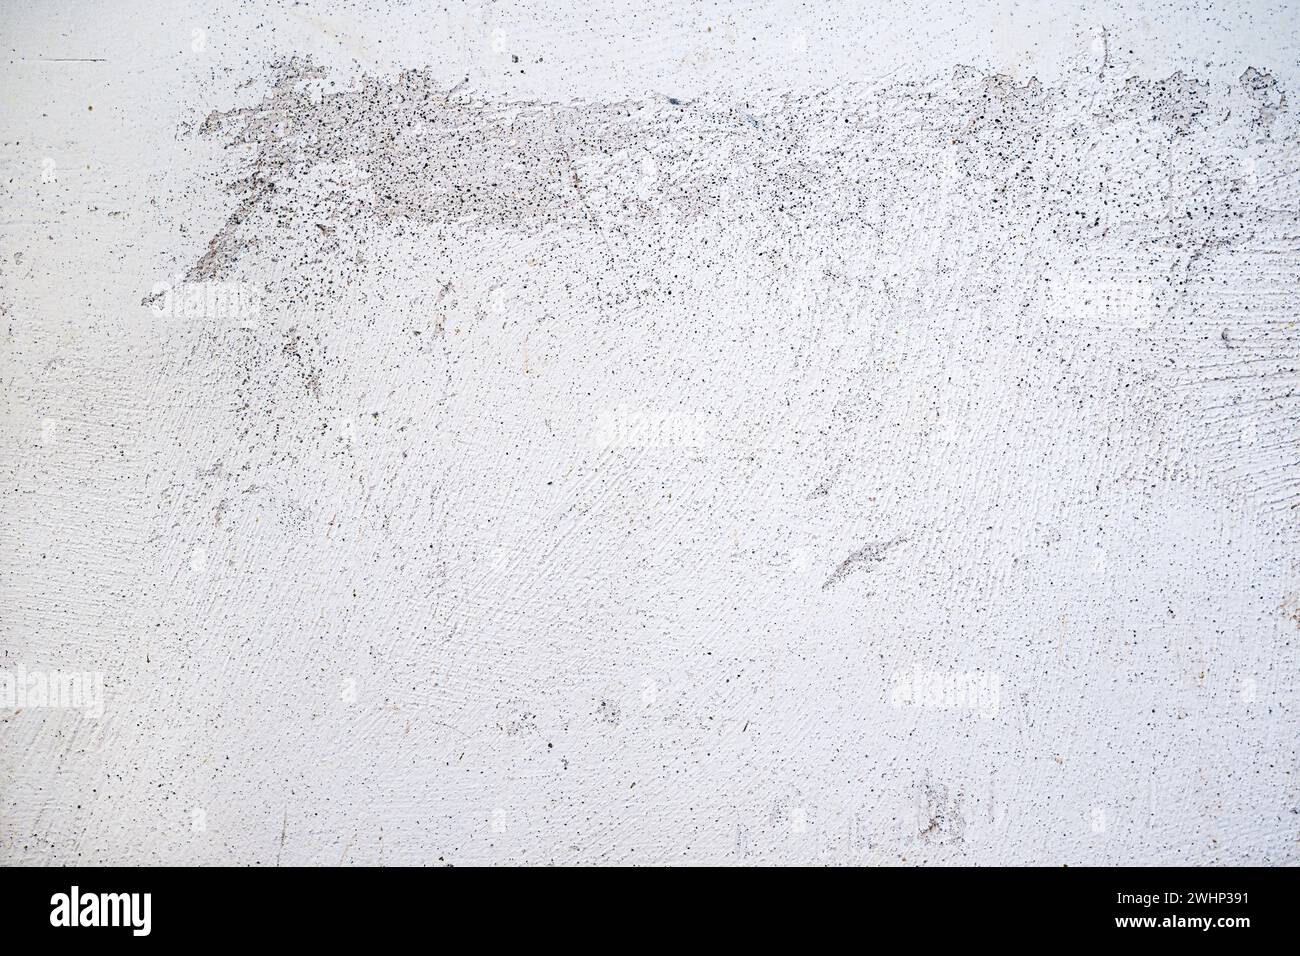 Plastered wall surface with rubbed off white paint, light gray background texture for urban themes or architecture, full frame, Stock Photo